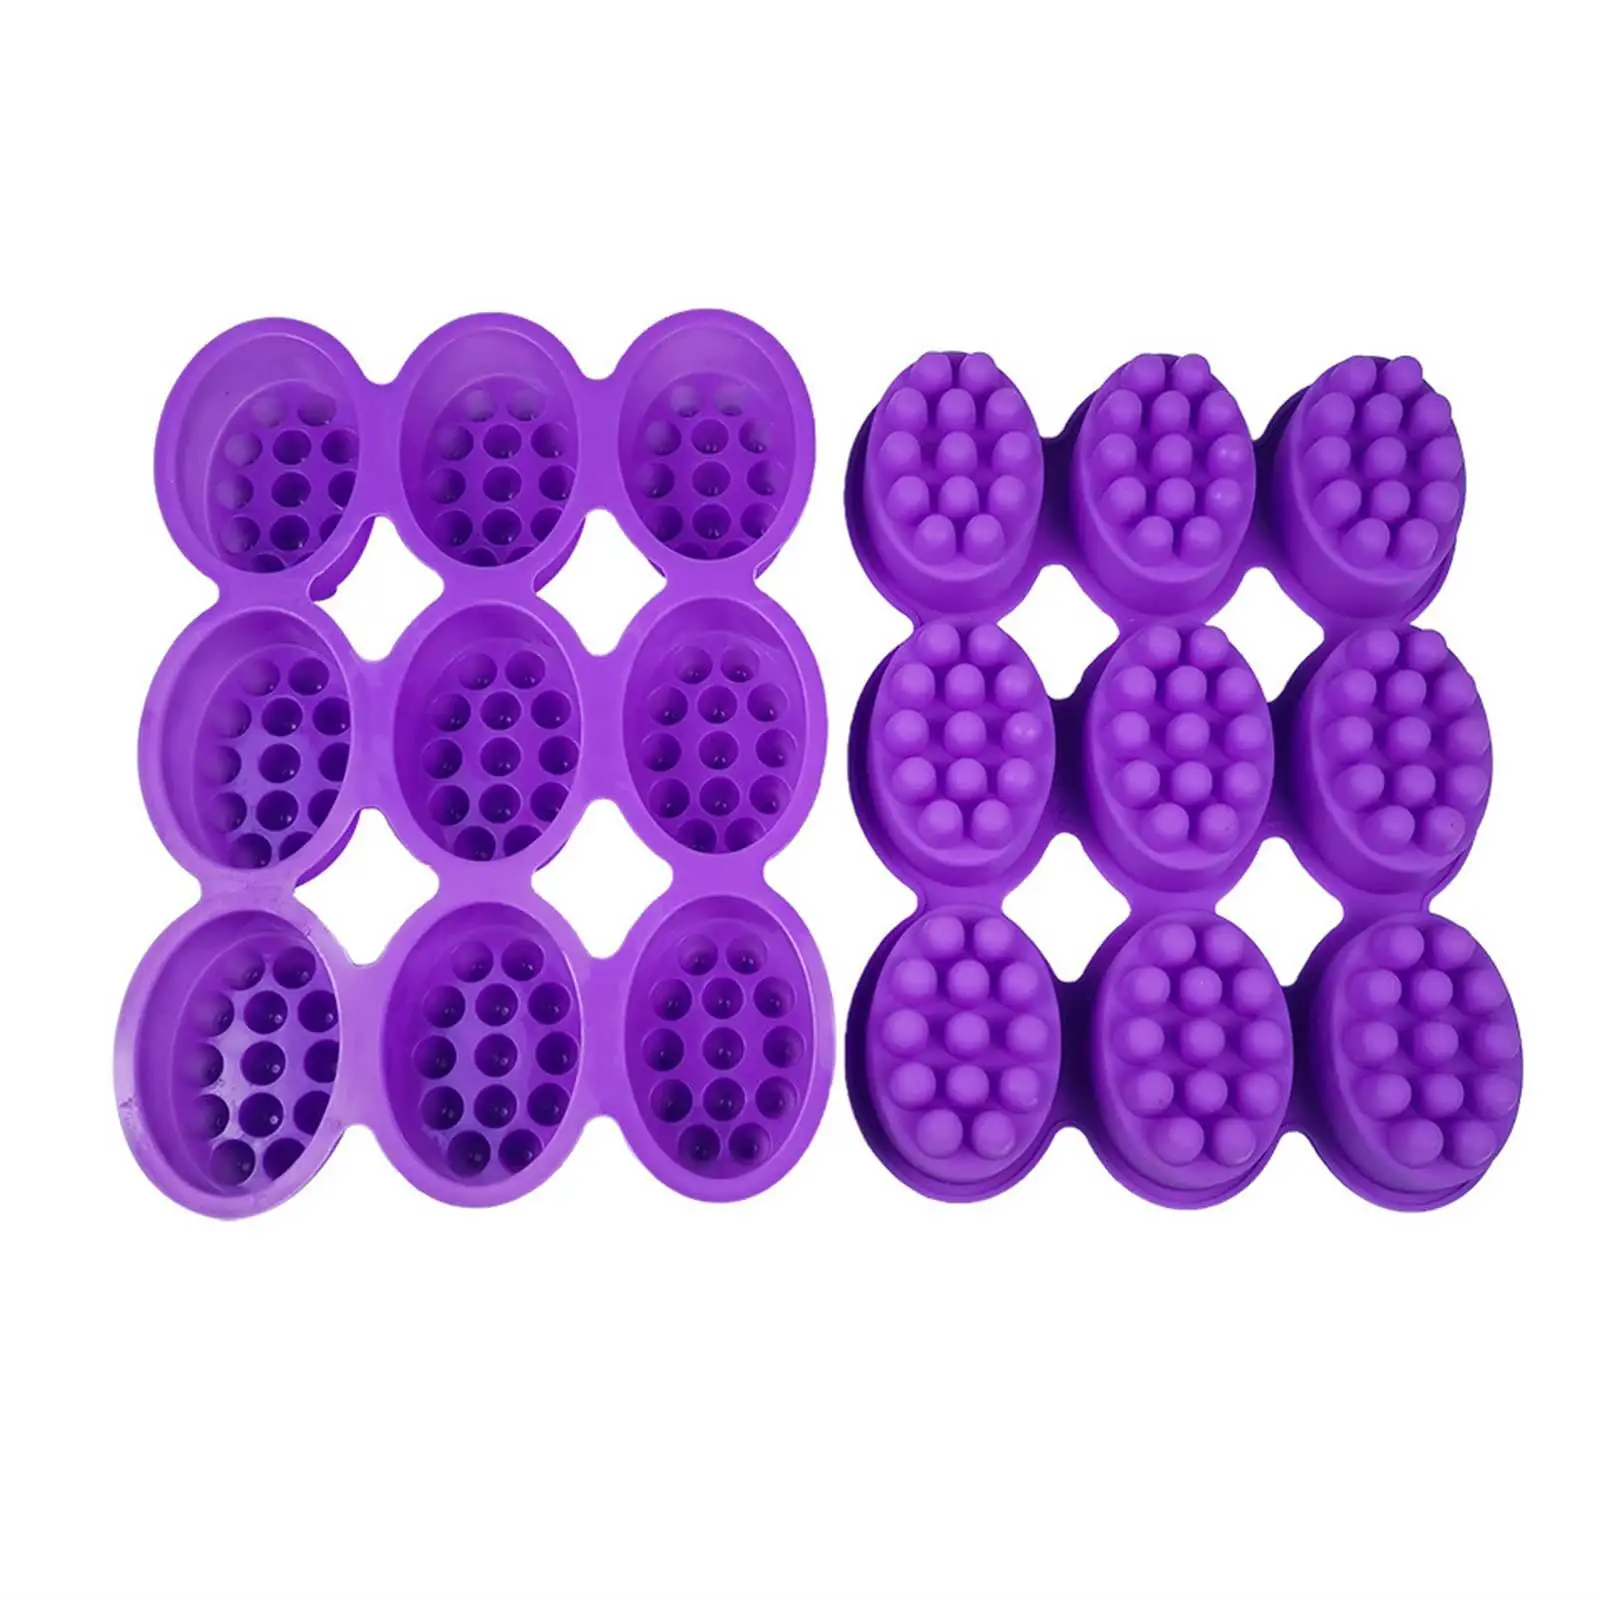 1pc Silicone Oval Soap Molds Massage Bar Mold Forms Soaps Making